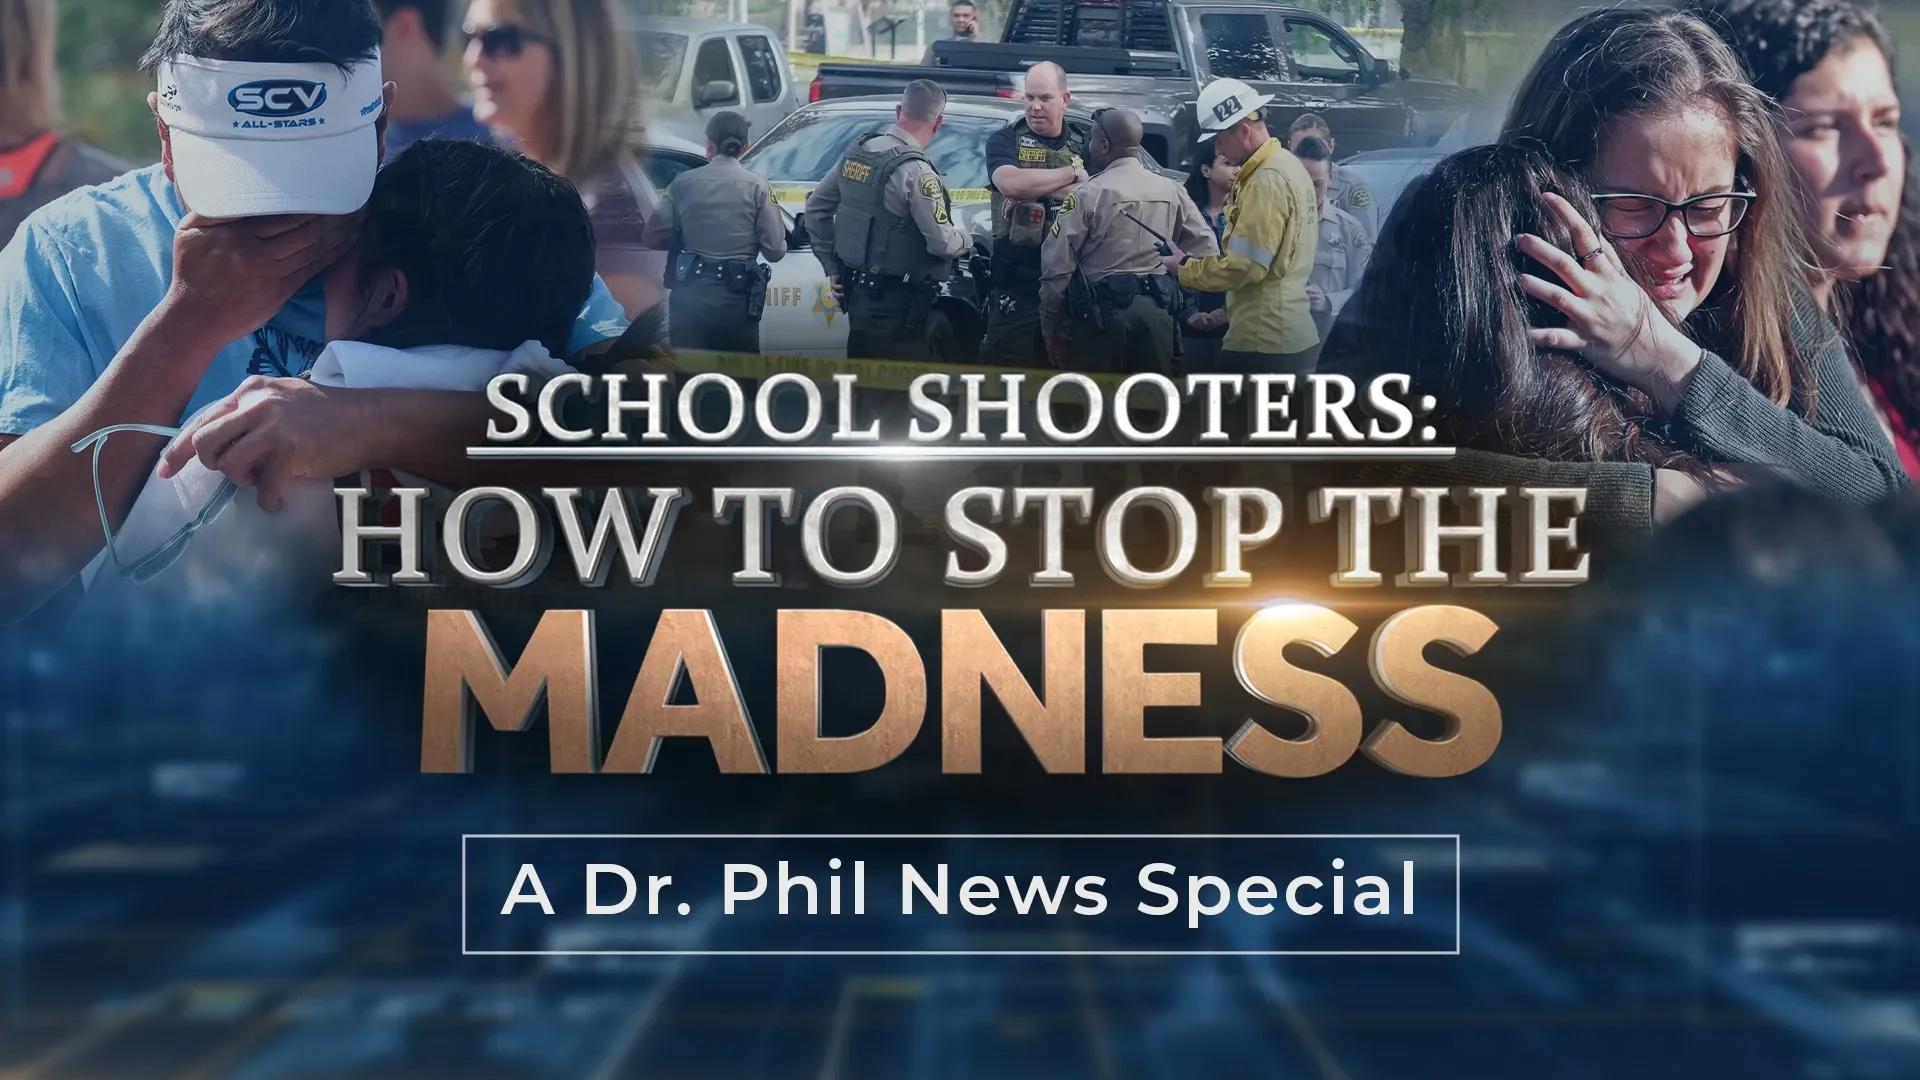 School Shooters: How to Stop the Madness A Dr. Phil News Special